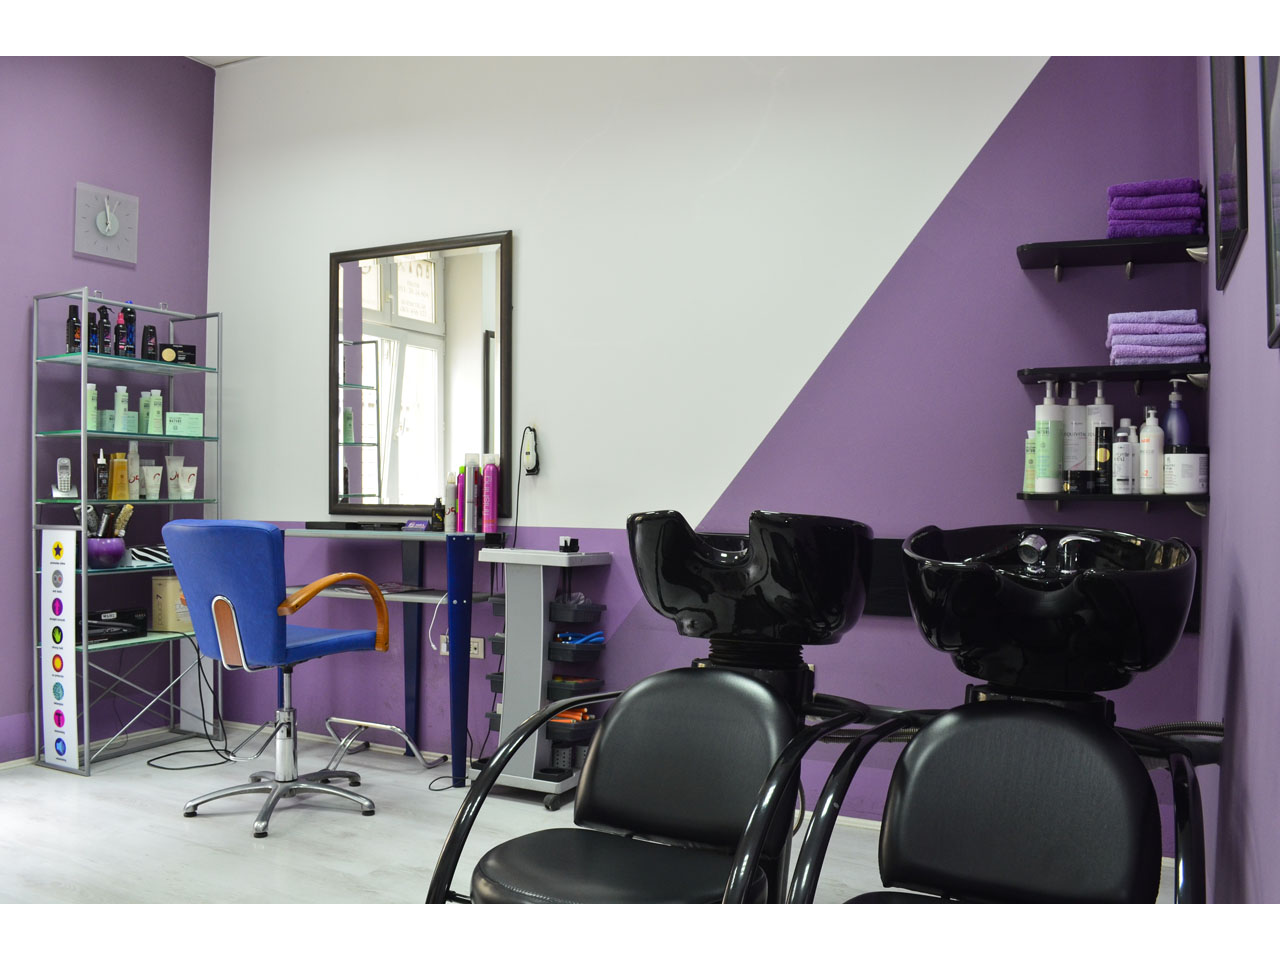 HAIRDRESSING AND COSMETIC SALON ZZ2 Hairdressers Belgrade - Photo 1